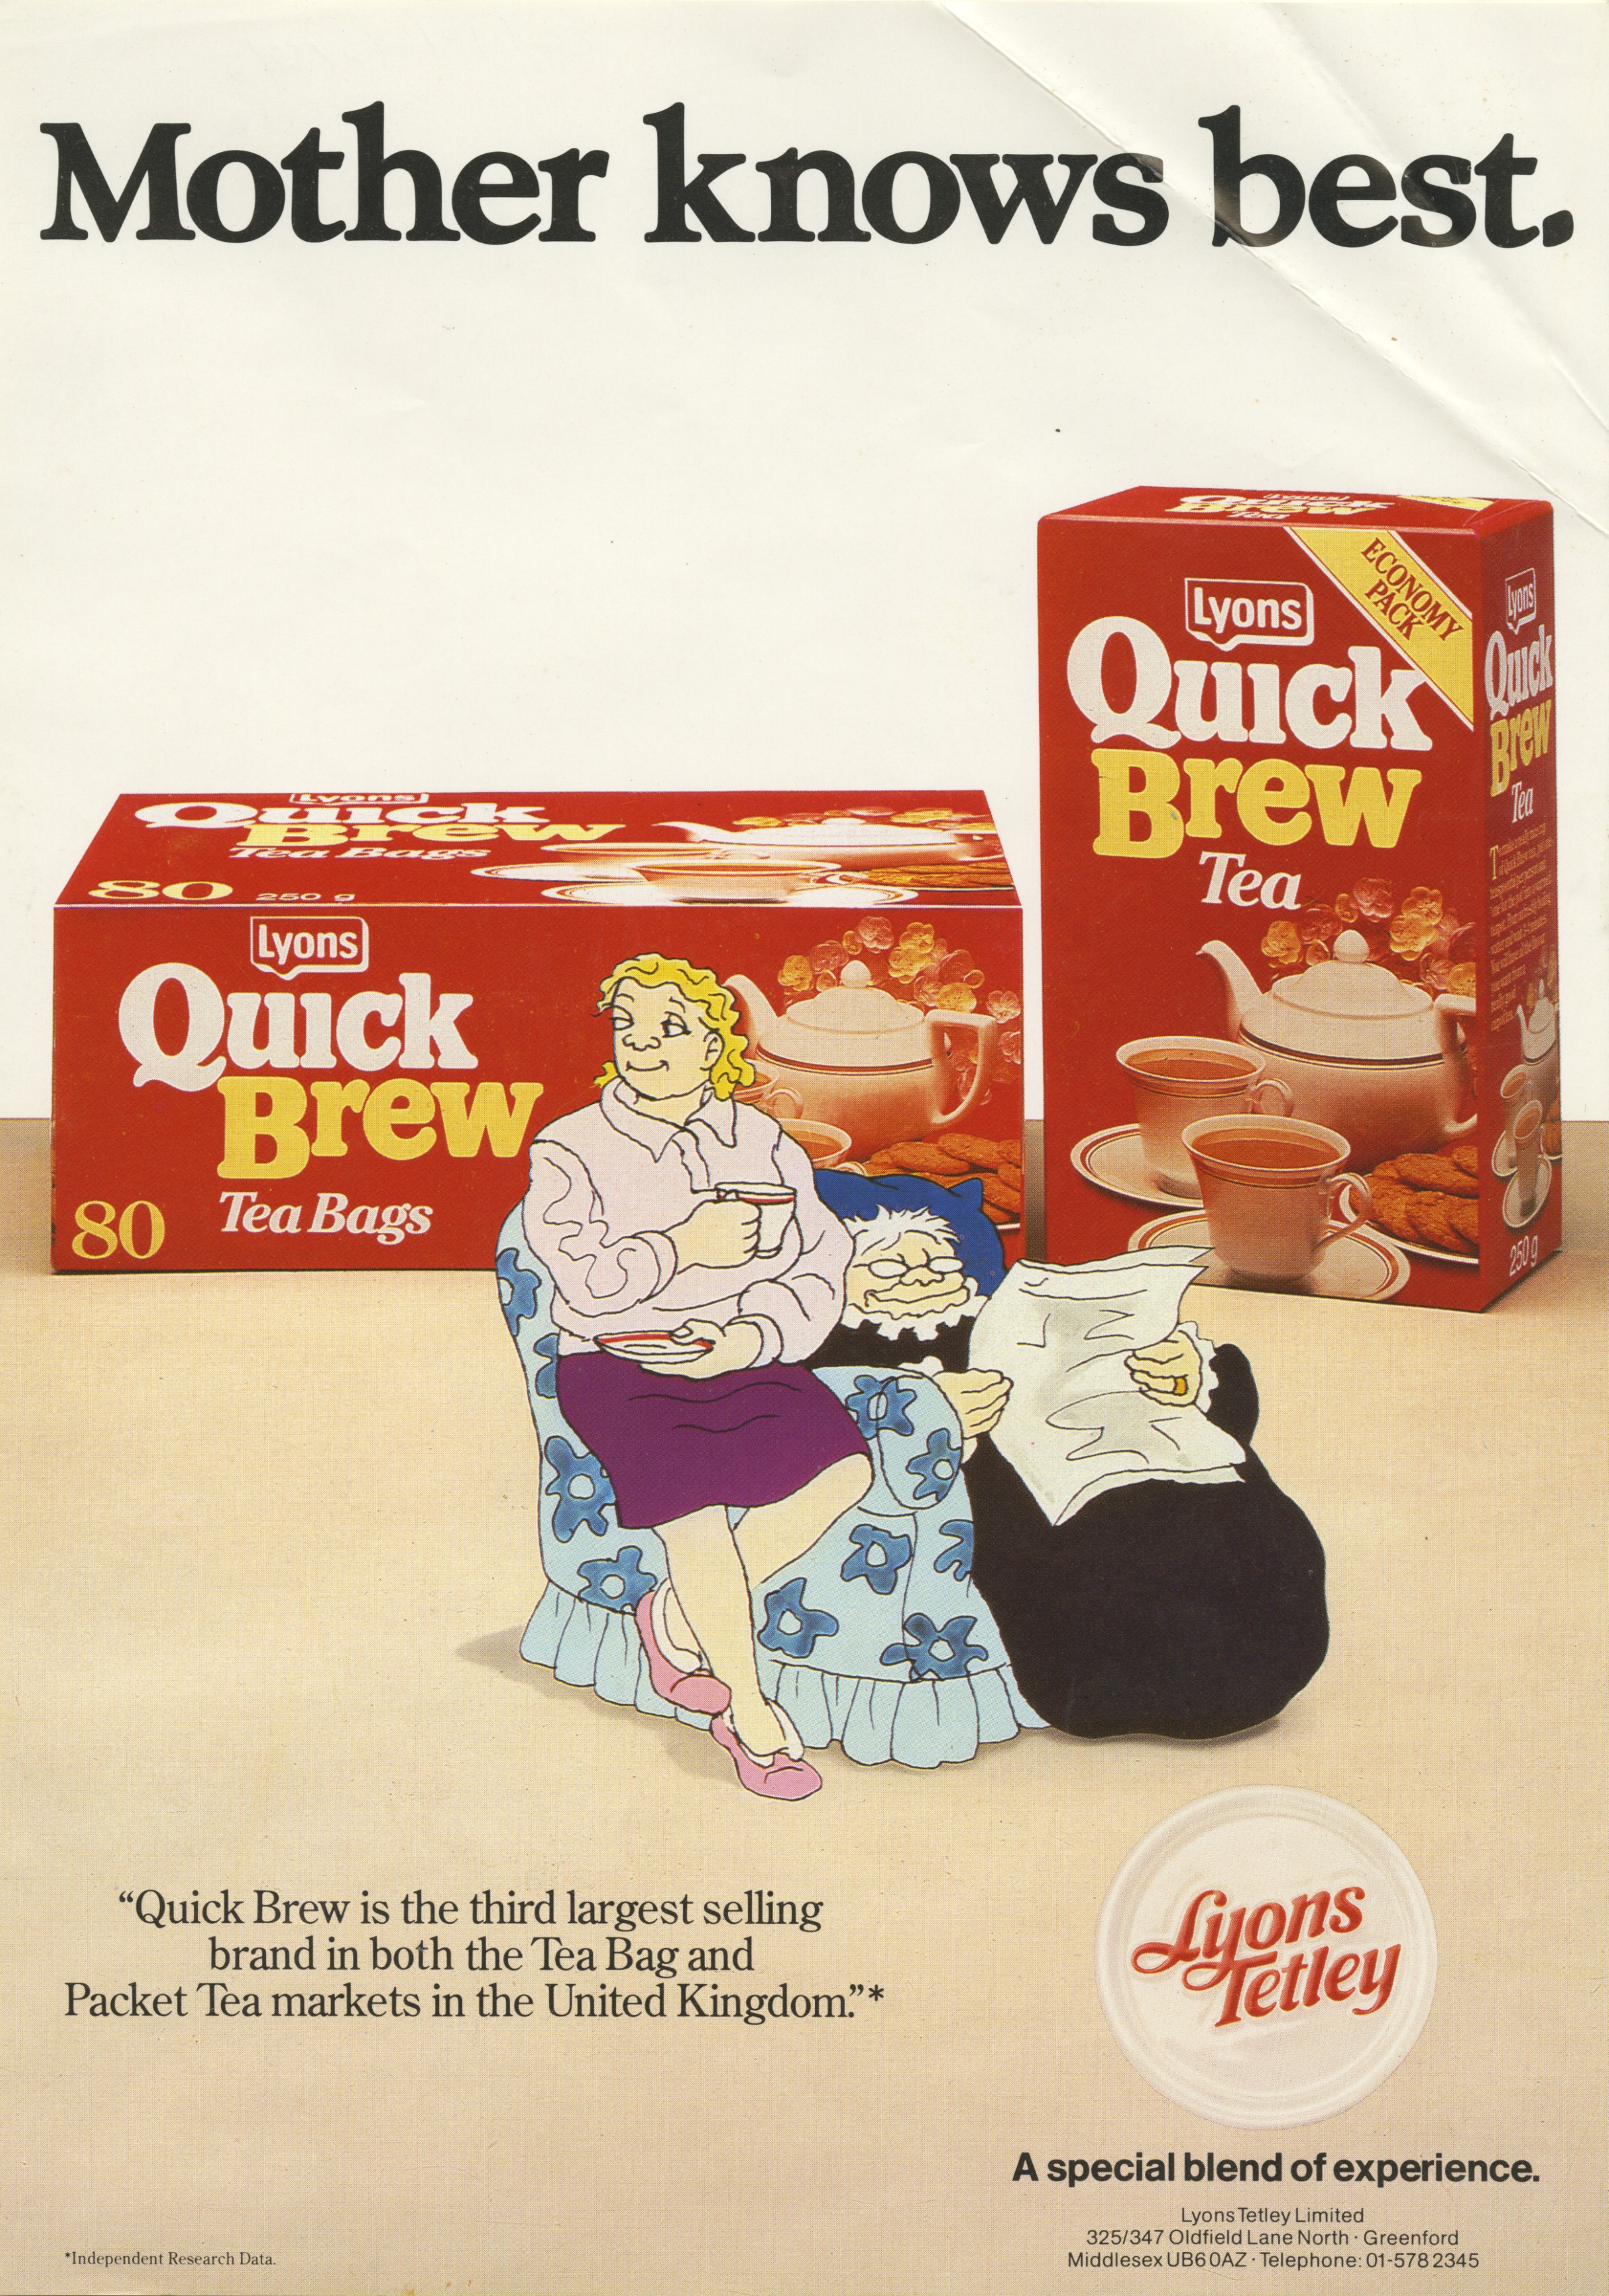 Colour advert for Lyons Quick Brew tea bags with Giles cartoon - Carl Giles, c.1985 (Image ref: GAPC0612)